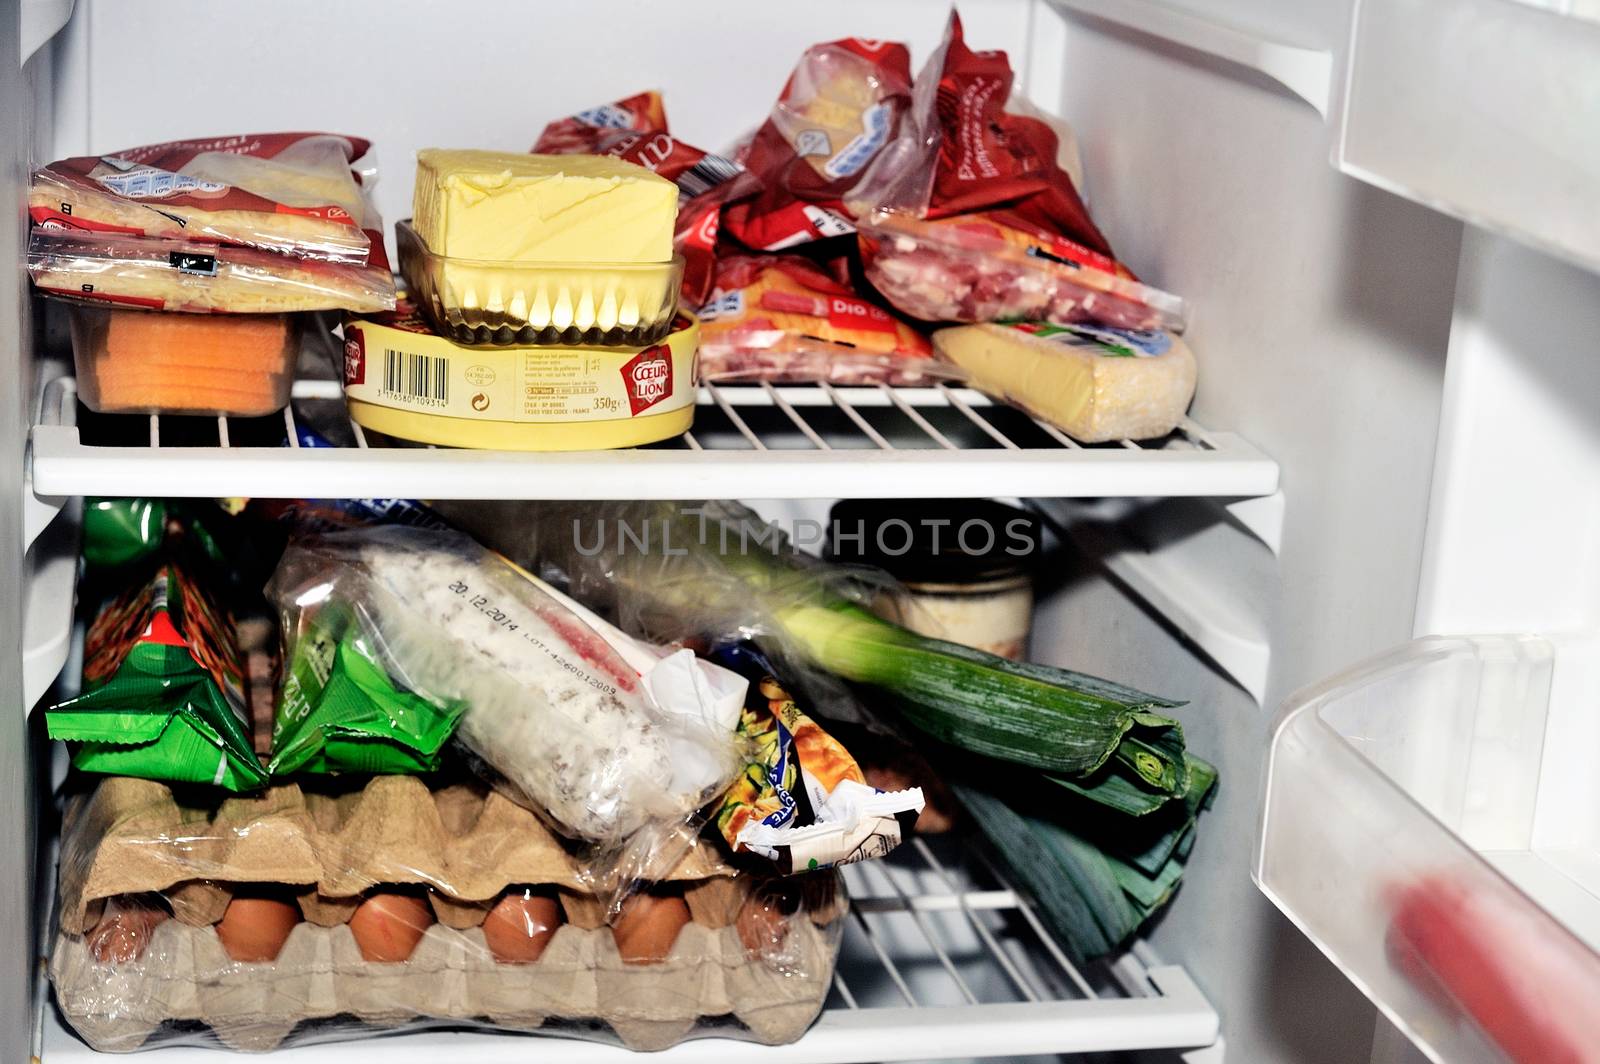 Open refrigerator containing food products each day as eggs, butter, cheese, sausage, meat and vegetables